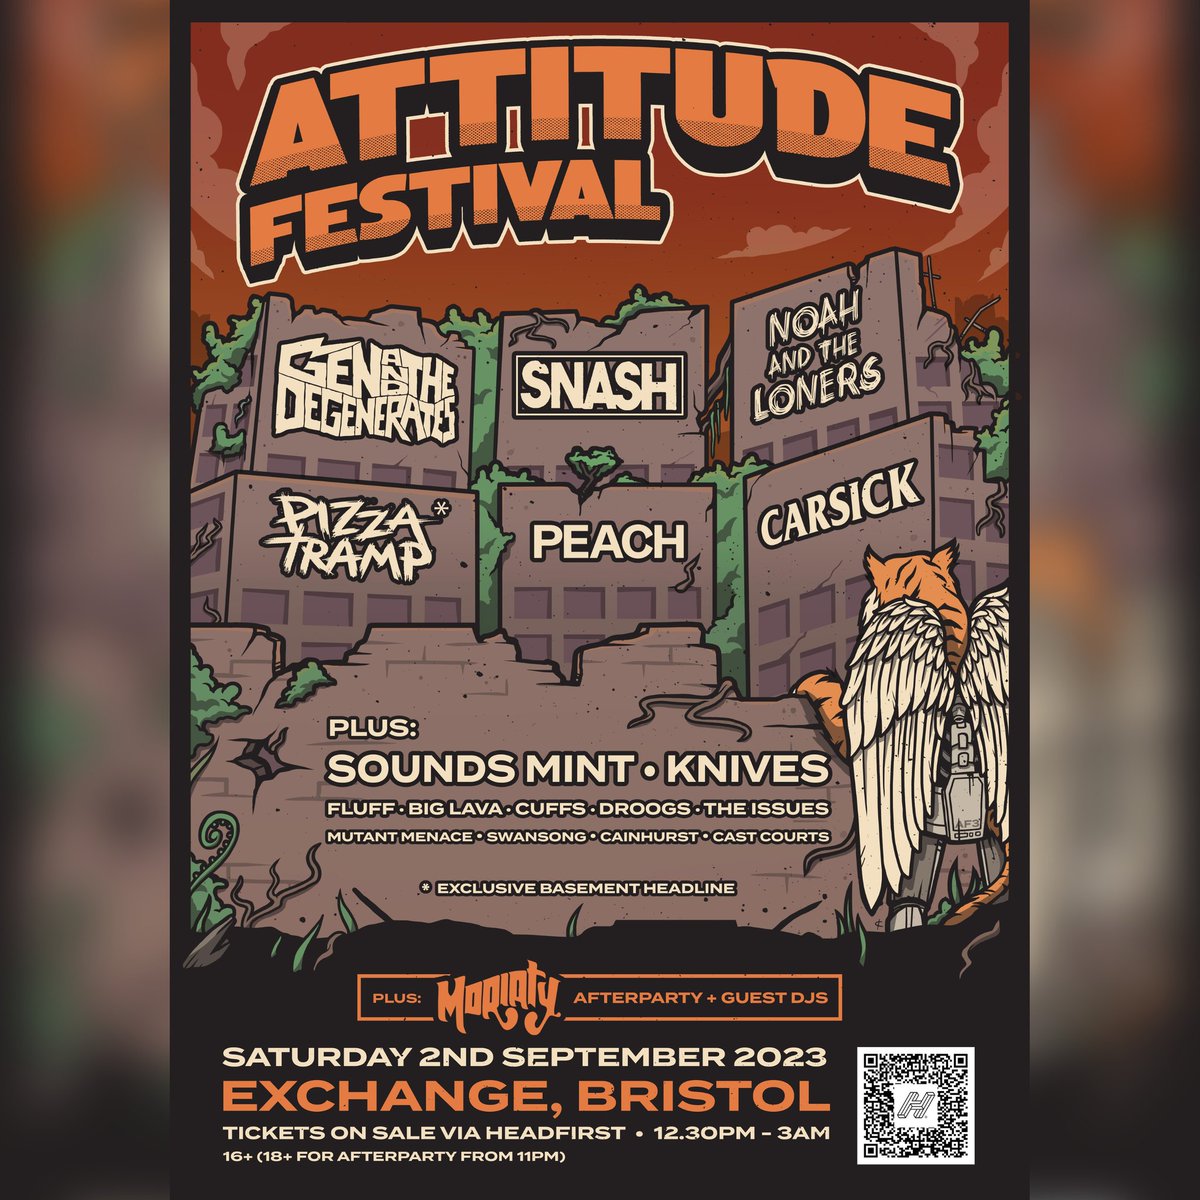 Catch our awesome bands, @gensdegenerates & @noahsloners, at Attitude Festival THIS WEEKEND 🎉 get tickets now via the QR code below ⬇️